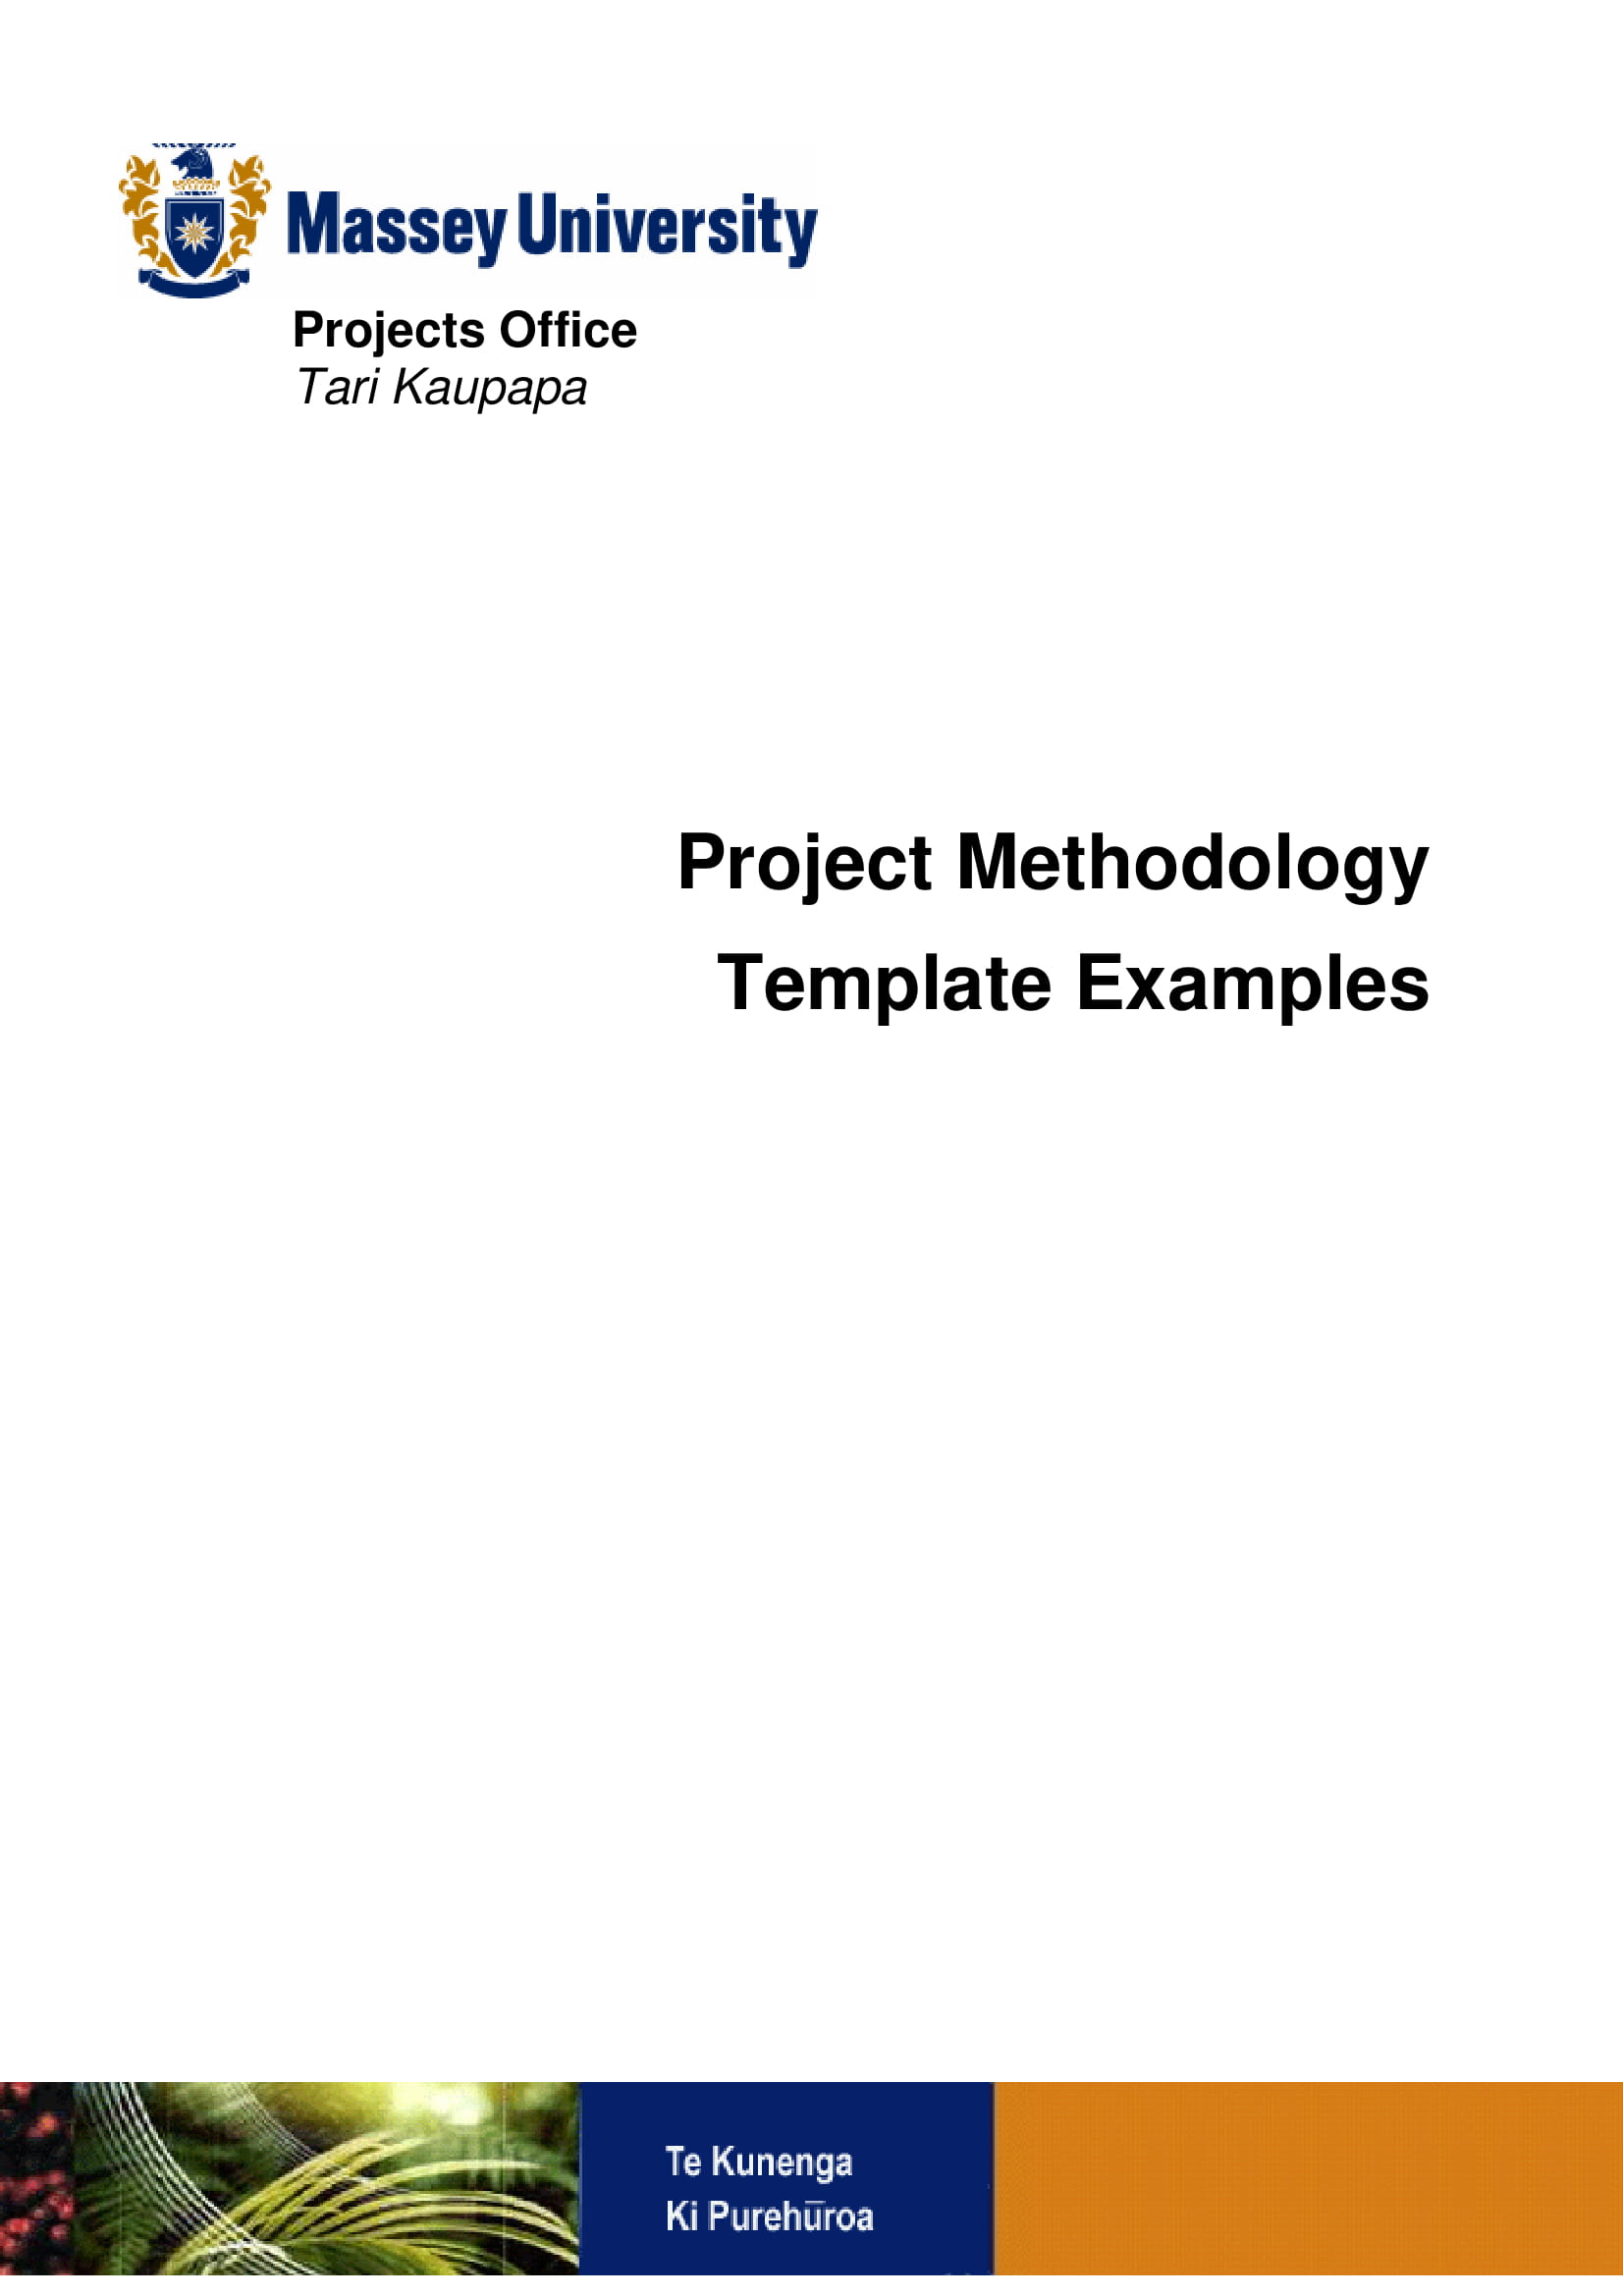 Operations Management Plan Template 12  Examples Format Pdf Examples